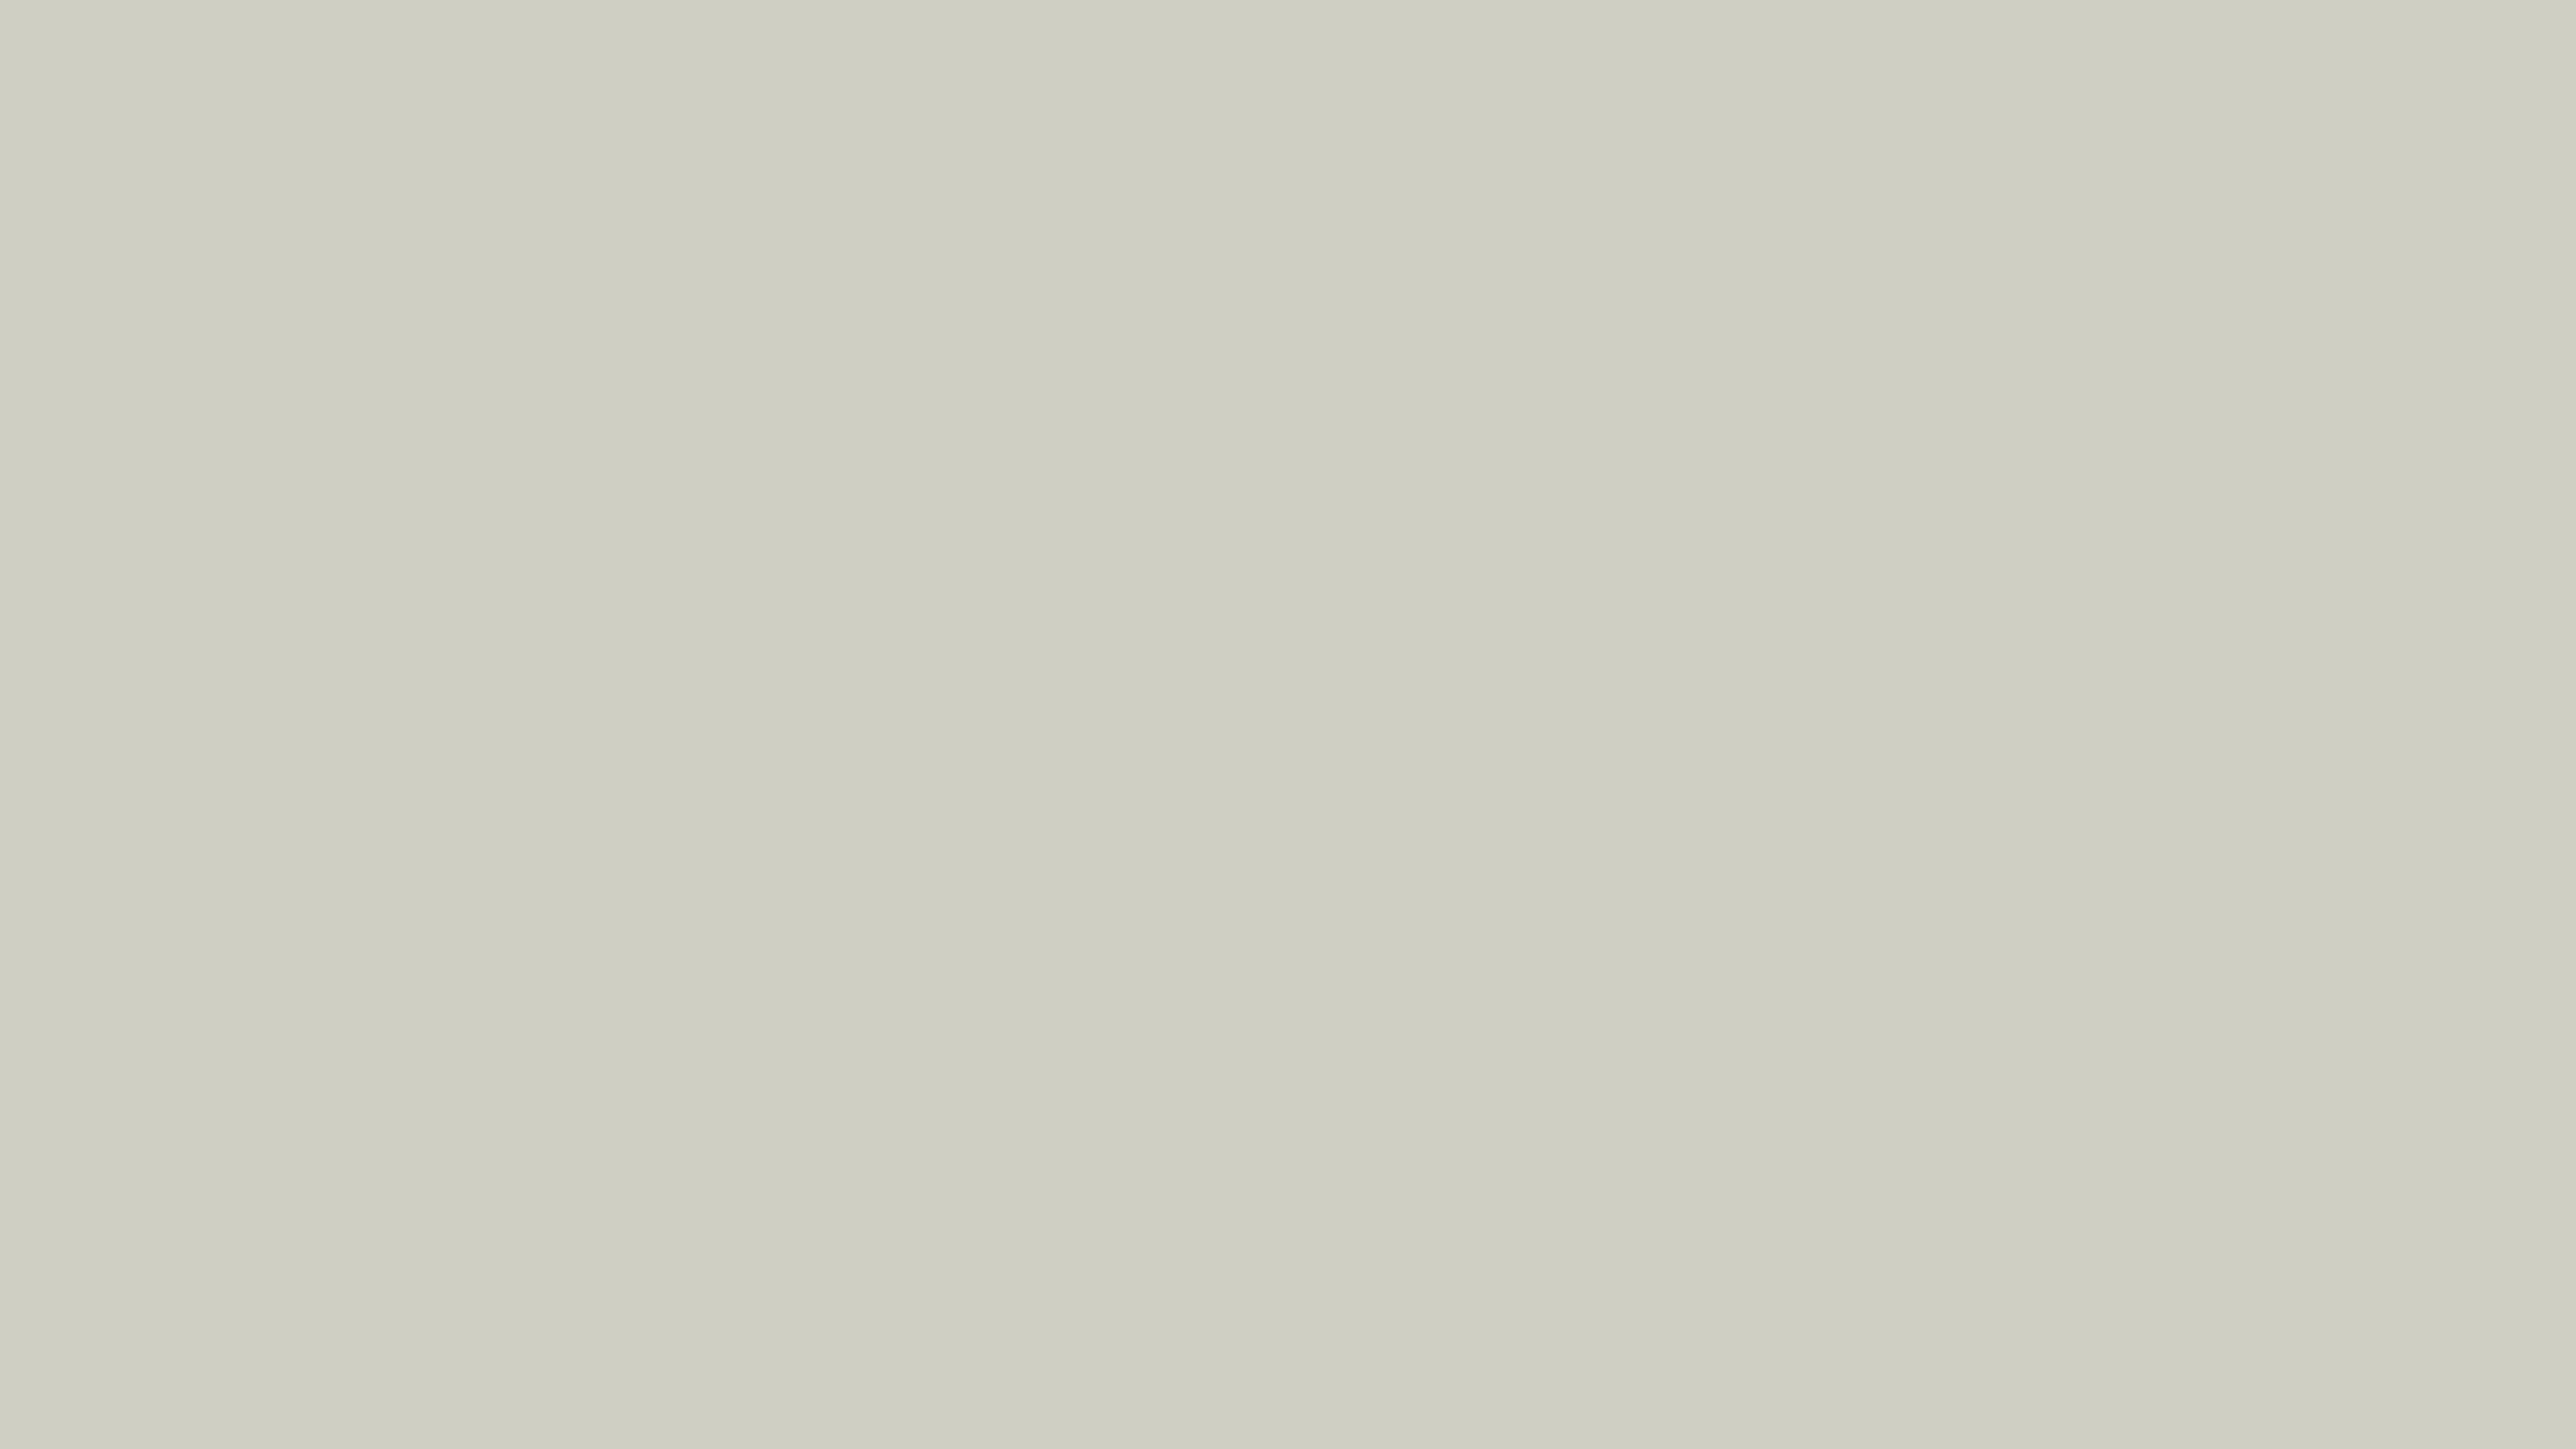 7680x4320 Pastel Gray Solid Color Background